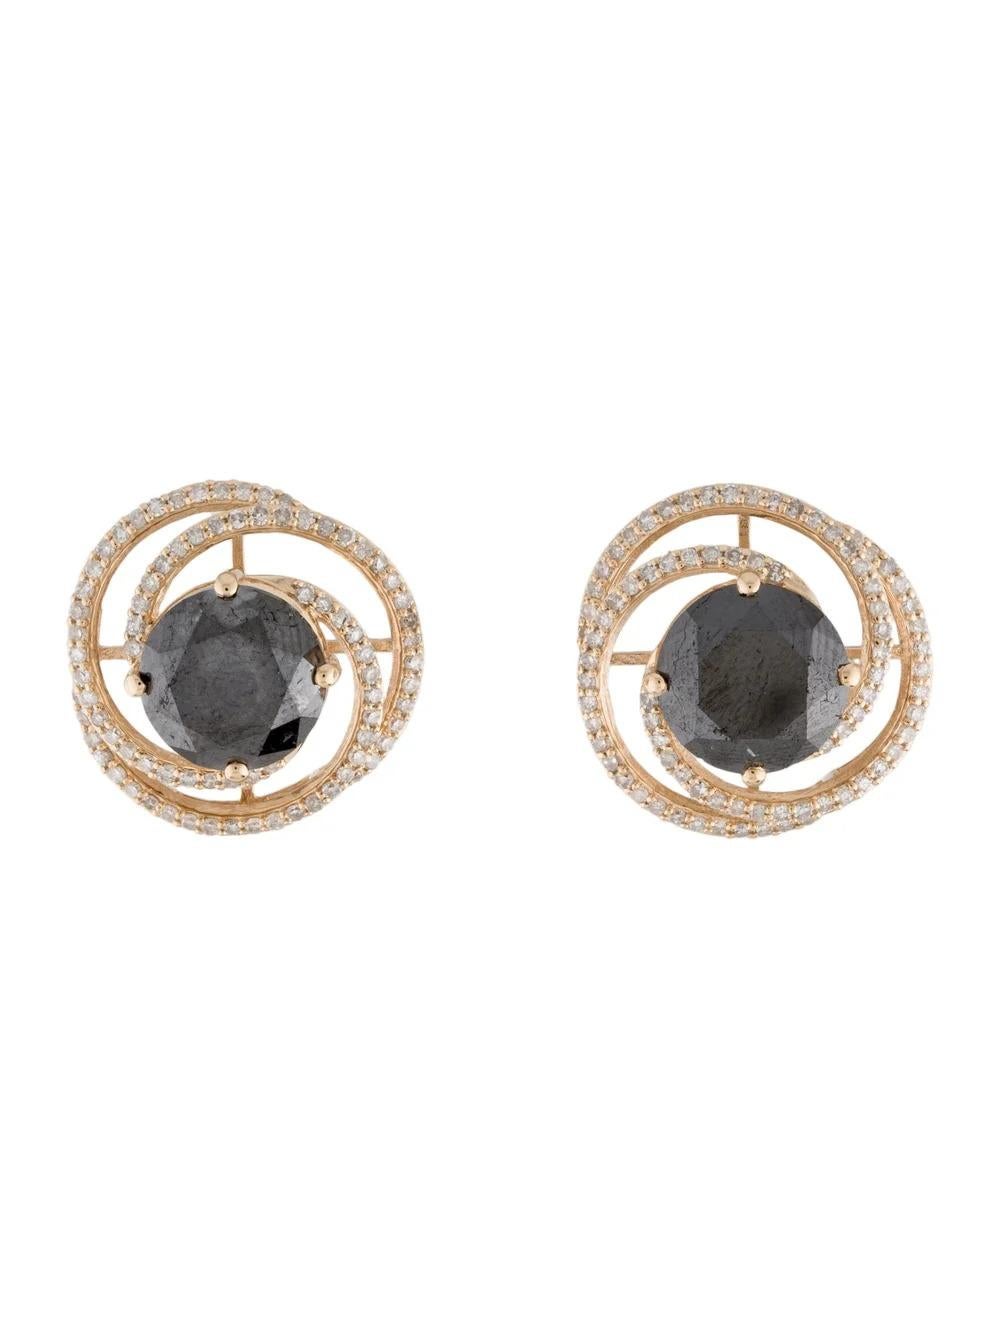 Indulge in opulence with these exquisite 14K Yellow Gold Diamond Stud Earrings. Crafted with meticulous attention to detail, these earrings are a true testament to luxury and sophistication. Featuring stunning round brilliant-cut black diamonds as